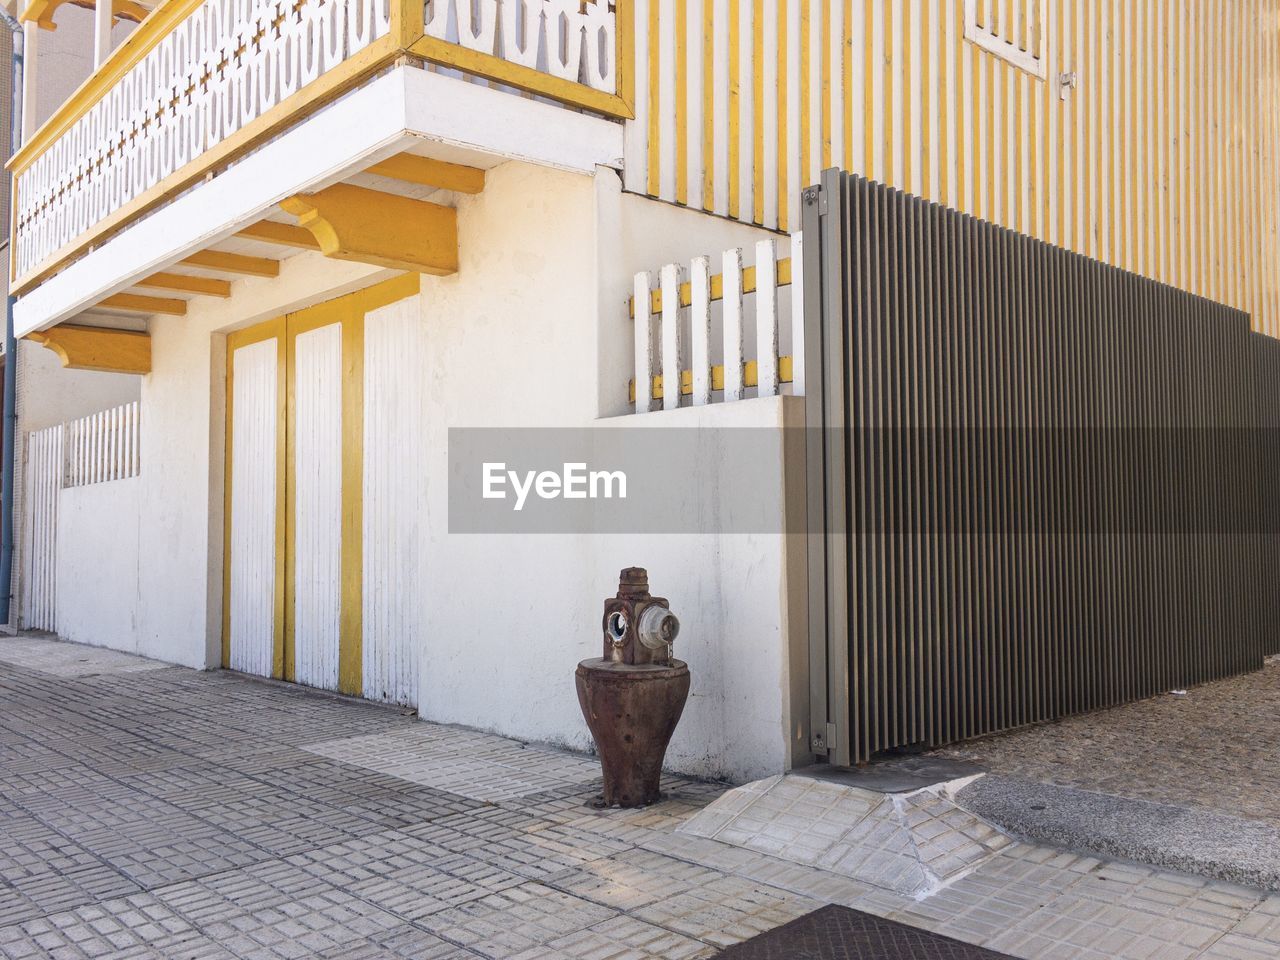 Building in portuguese coastal town and fire hydrant 